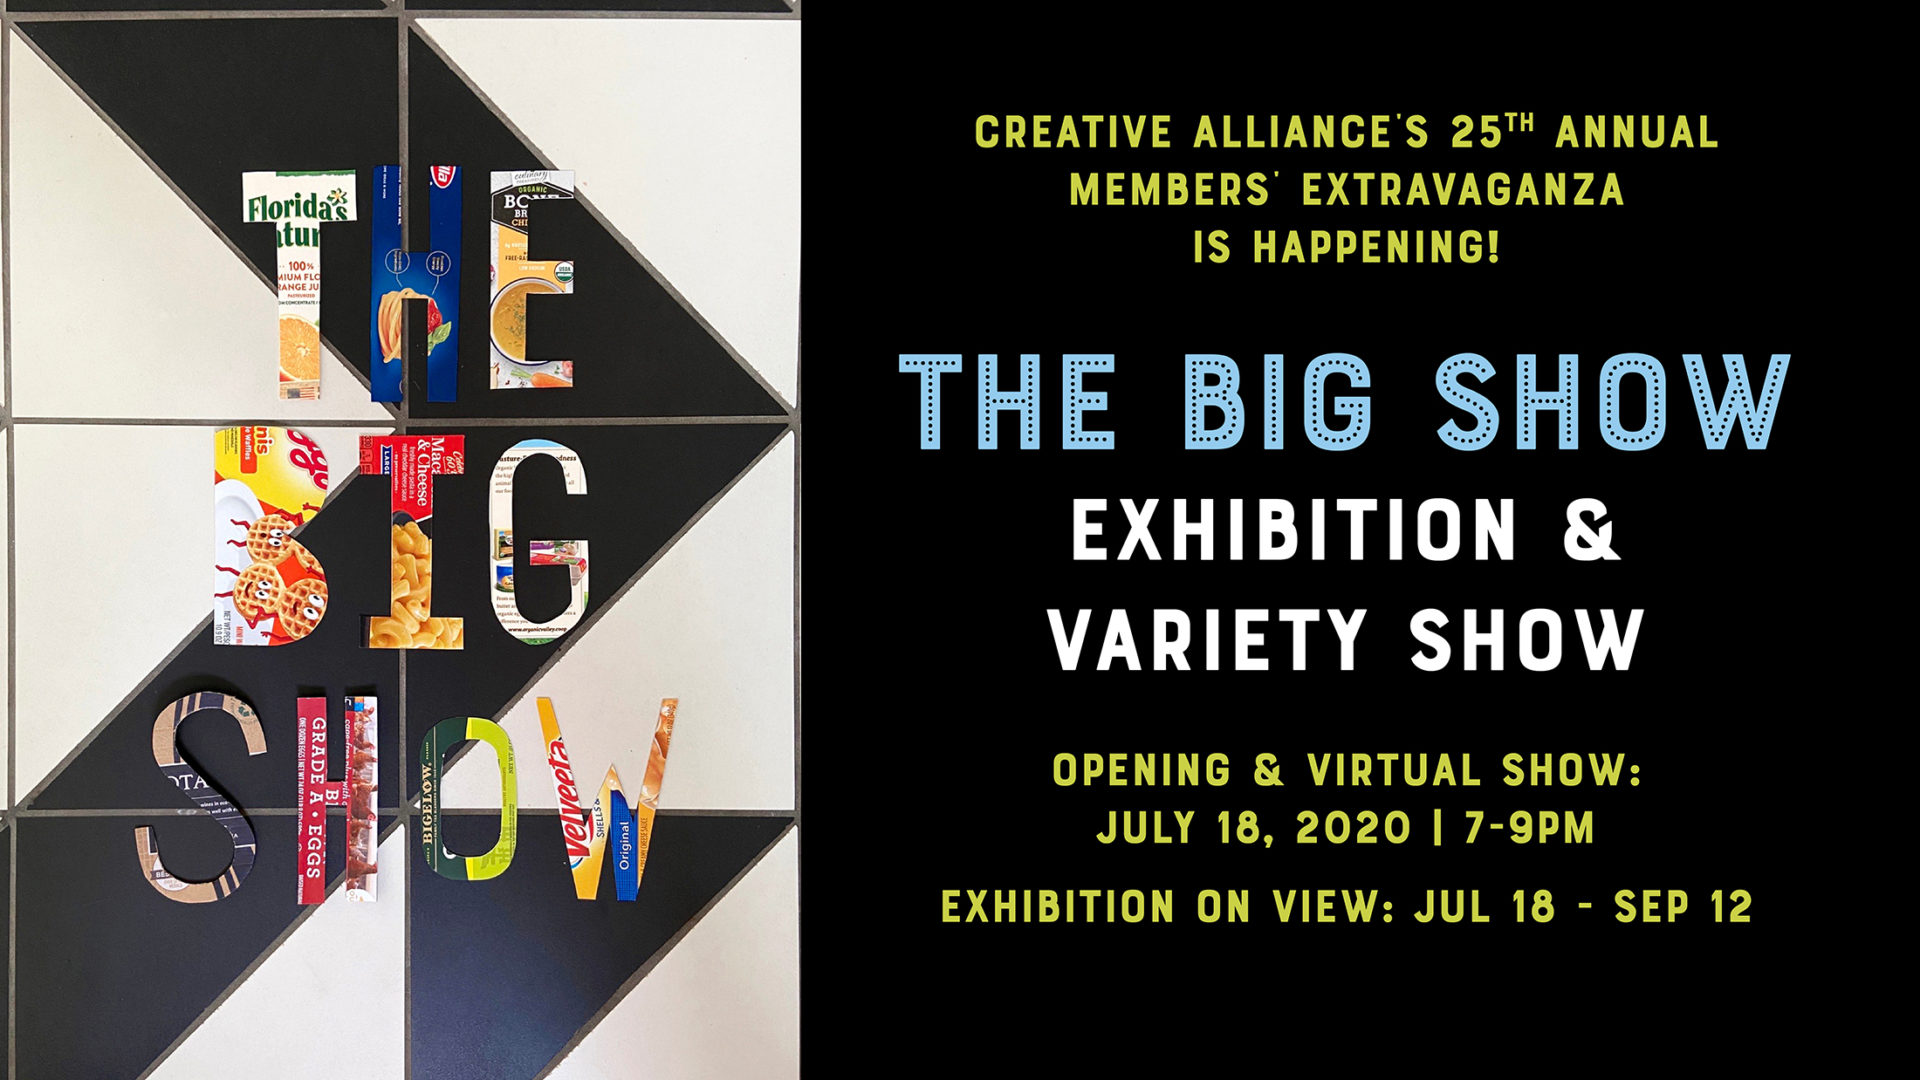 Creative Alliance | the big show creative alliance members exhibition and variety show